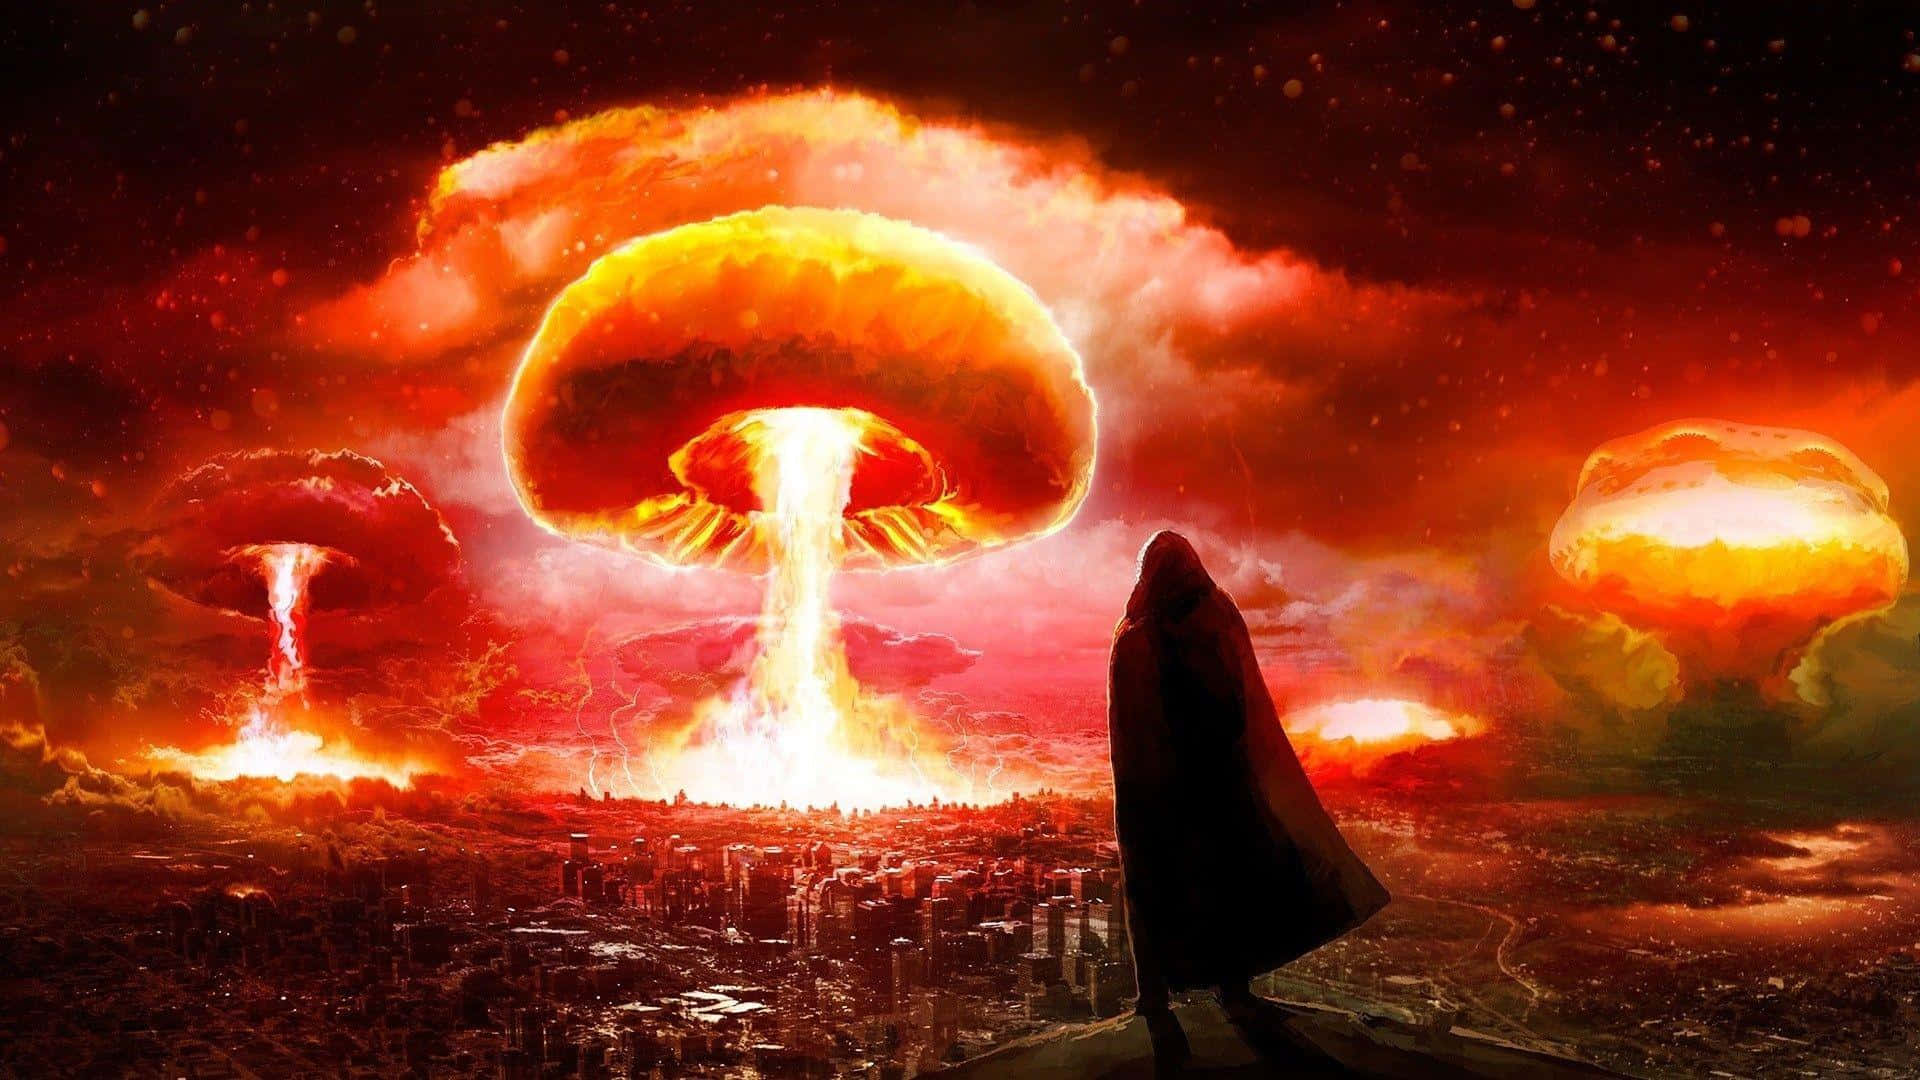 Apocalyptic_ Nuclear_ Explosions Background